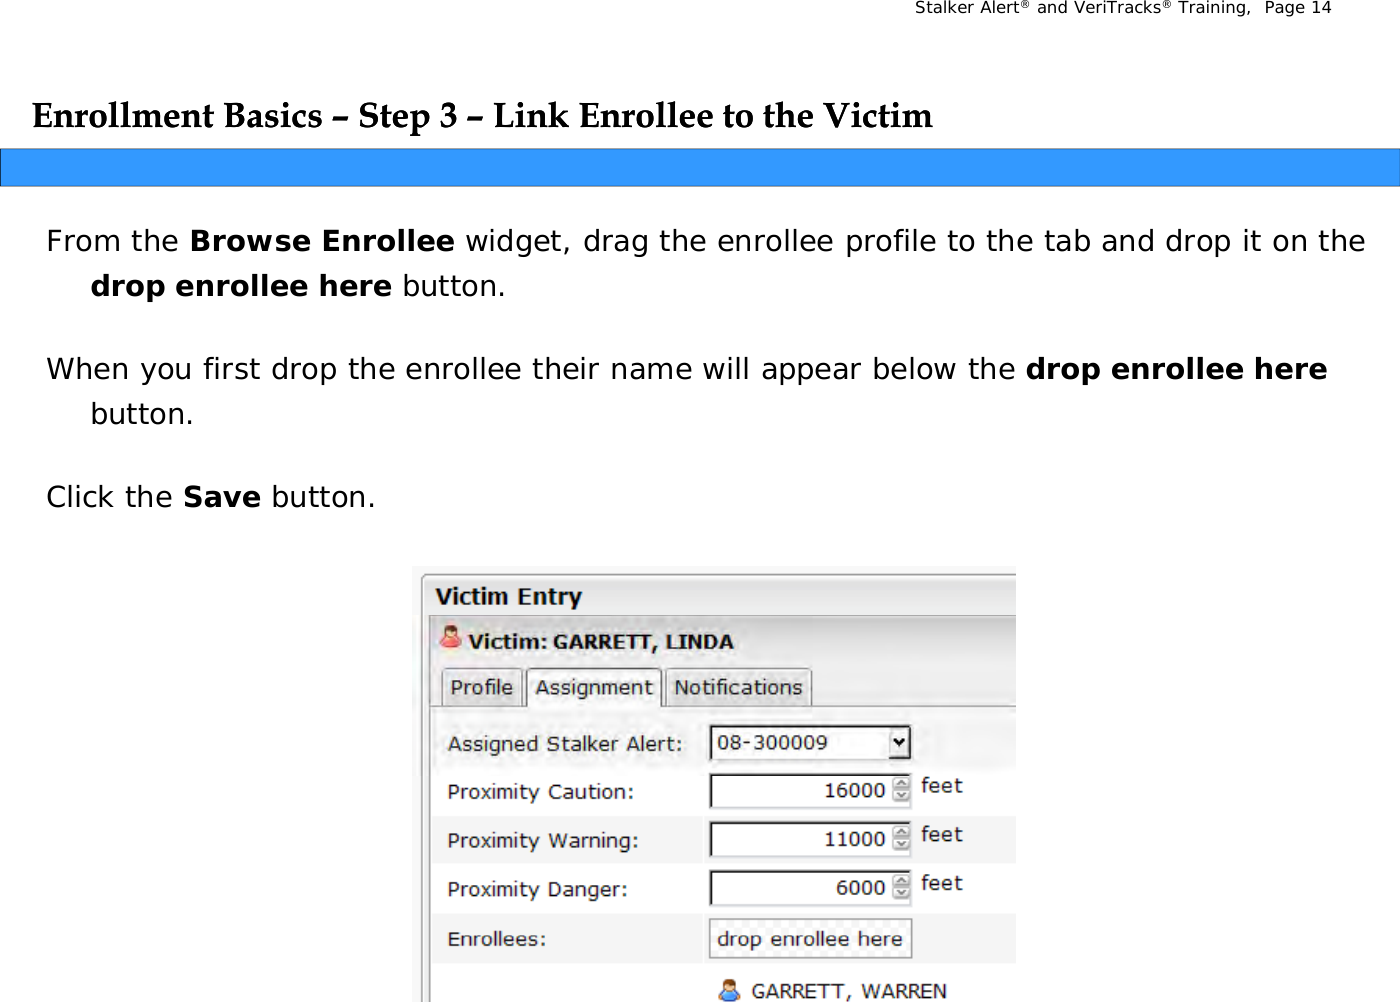 Stalker Alert®and VeriTracks®Training,  Page 14Enrollment Basics Enrollment Basics ––Step 3 Step 3 –– Link Enrollee to the VictimLink Enrollee to the VictimppFrom the Browse Enrollee widget, drag the enrollee profile to the tab and drop it on the drop enrollee herebutton.  drop enrollee herebutton.  When you first drop the enrollee their name will appear below the drop enrollee herebutton.Click the Save button.